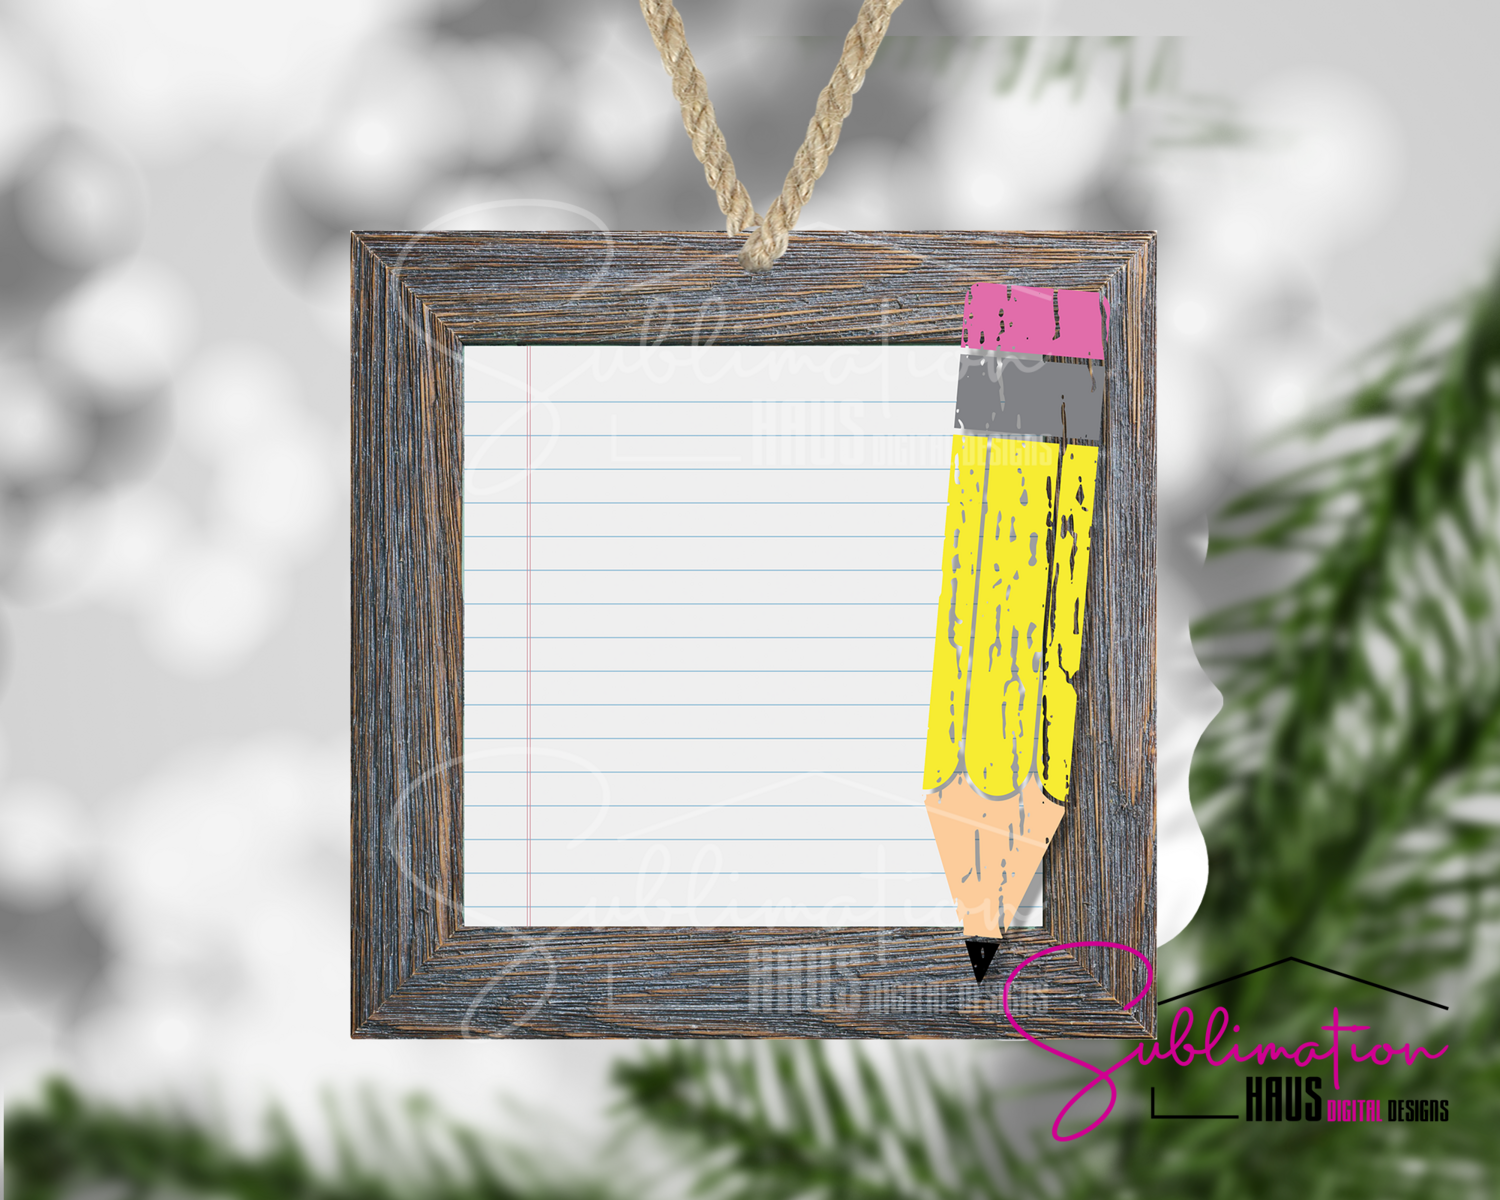 Pencil and Paper Frame - Winter Holiday Frame Ornament